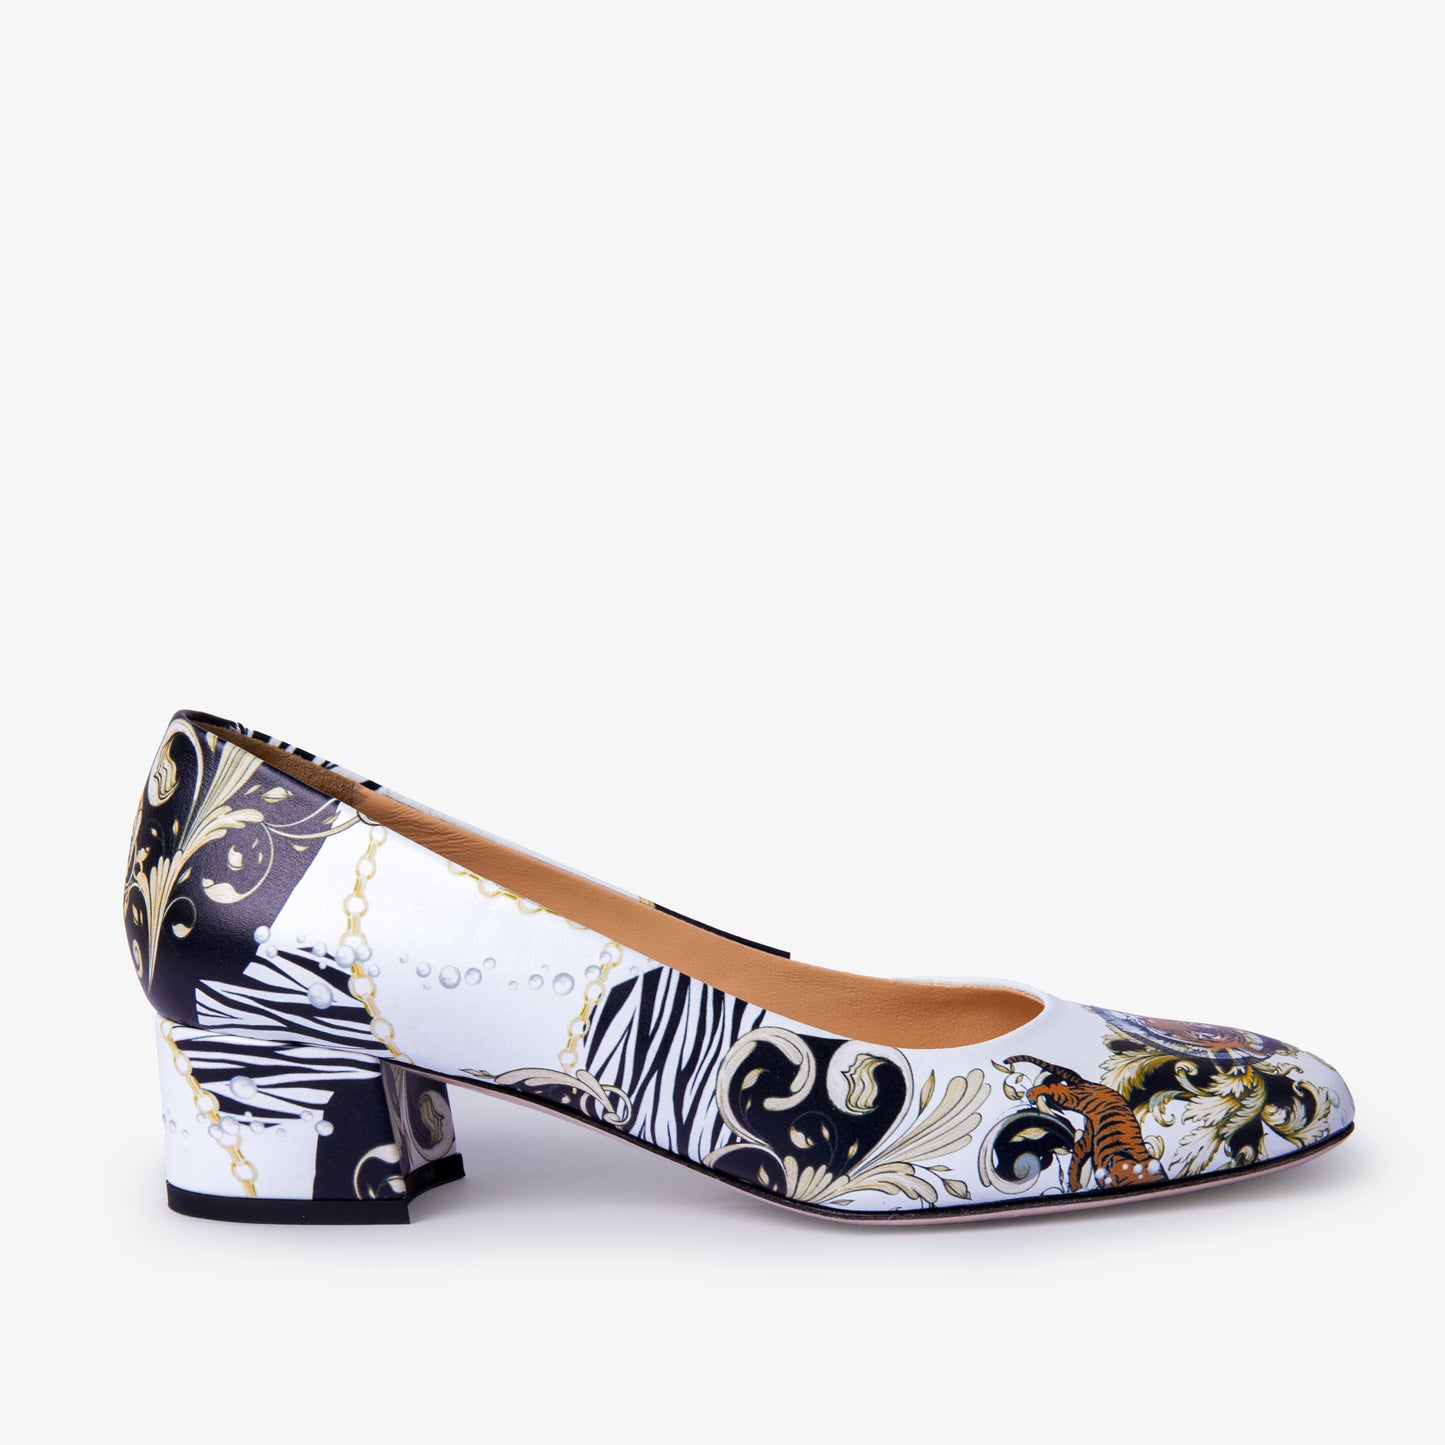 The Perugia White Leather Lover Heel Pump Women Shoe